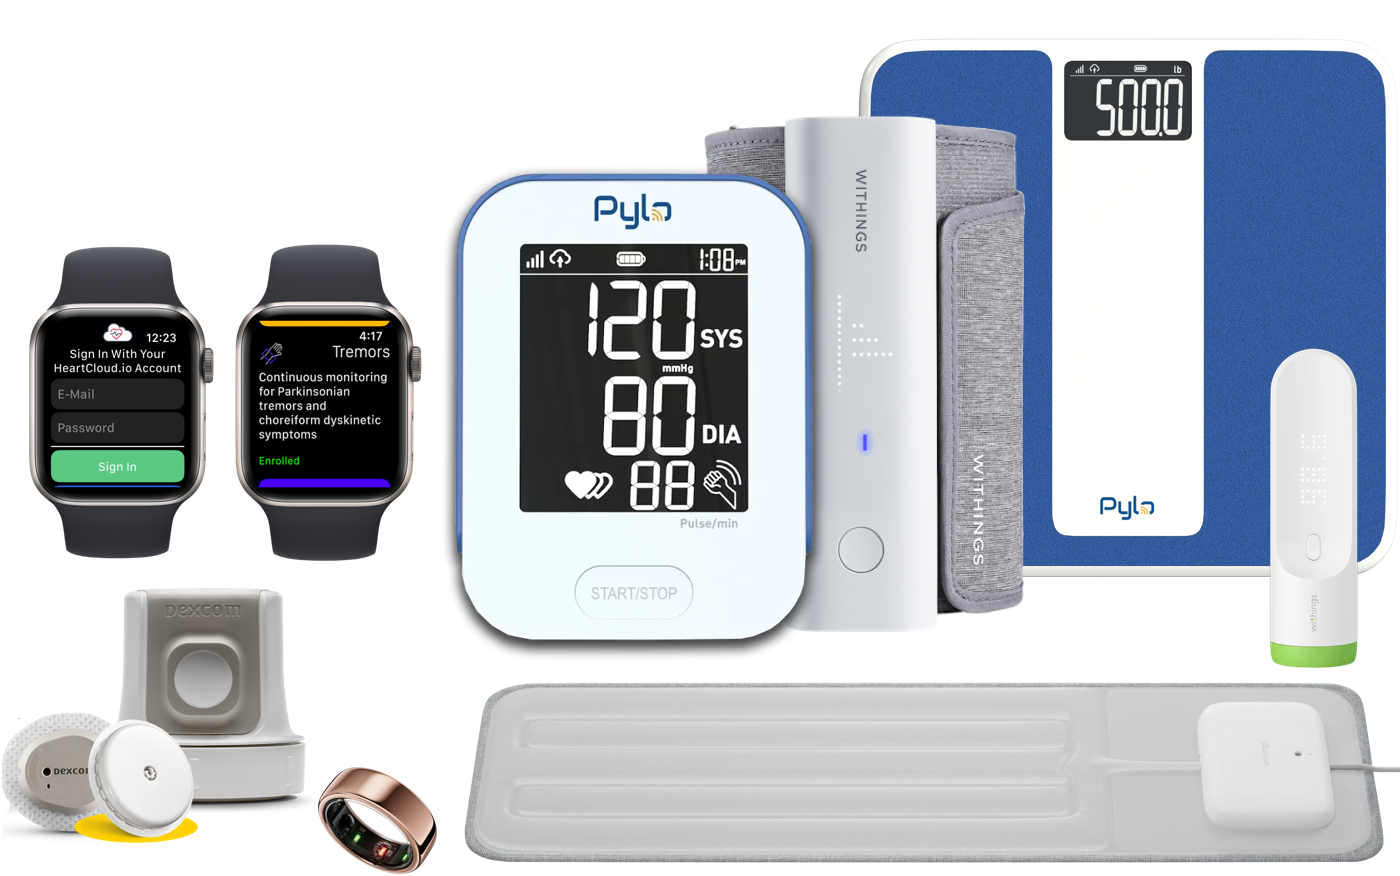 Auto-uploading capabilities in our platform's use of  Apple Watch, glucometers (CGM and BGM), and 4G cellular-enabled blood pressure cuffs and weight scales